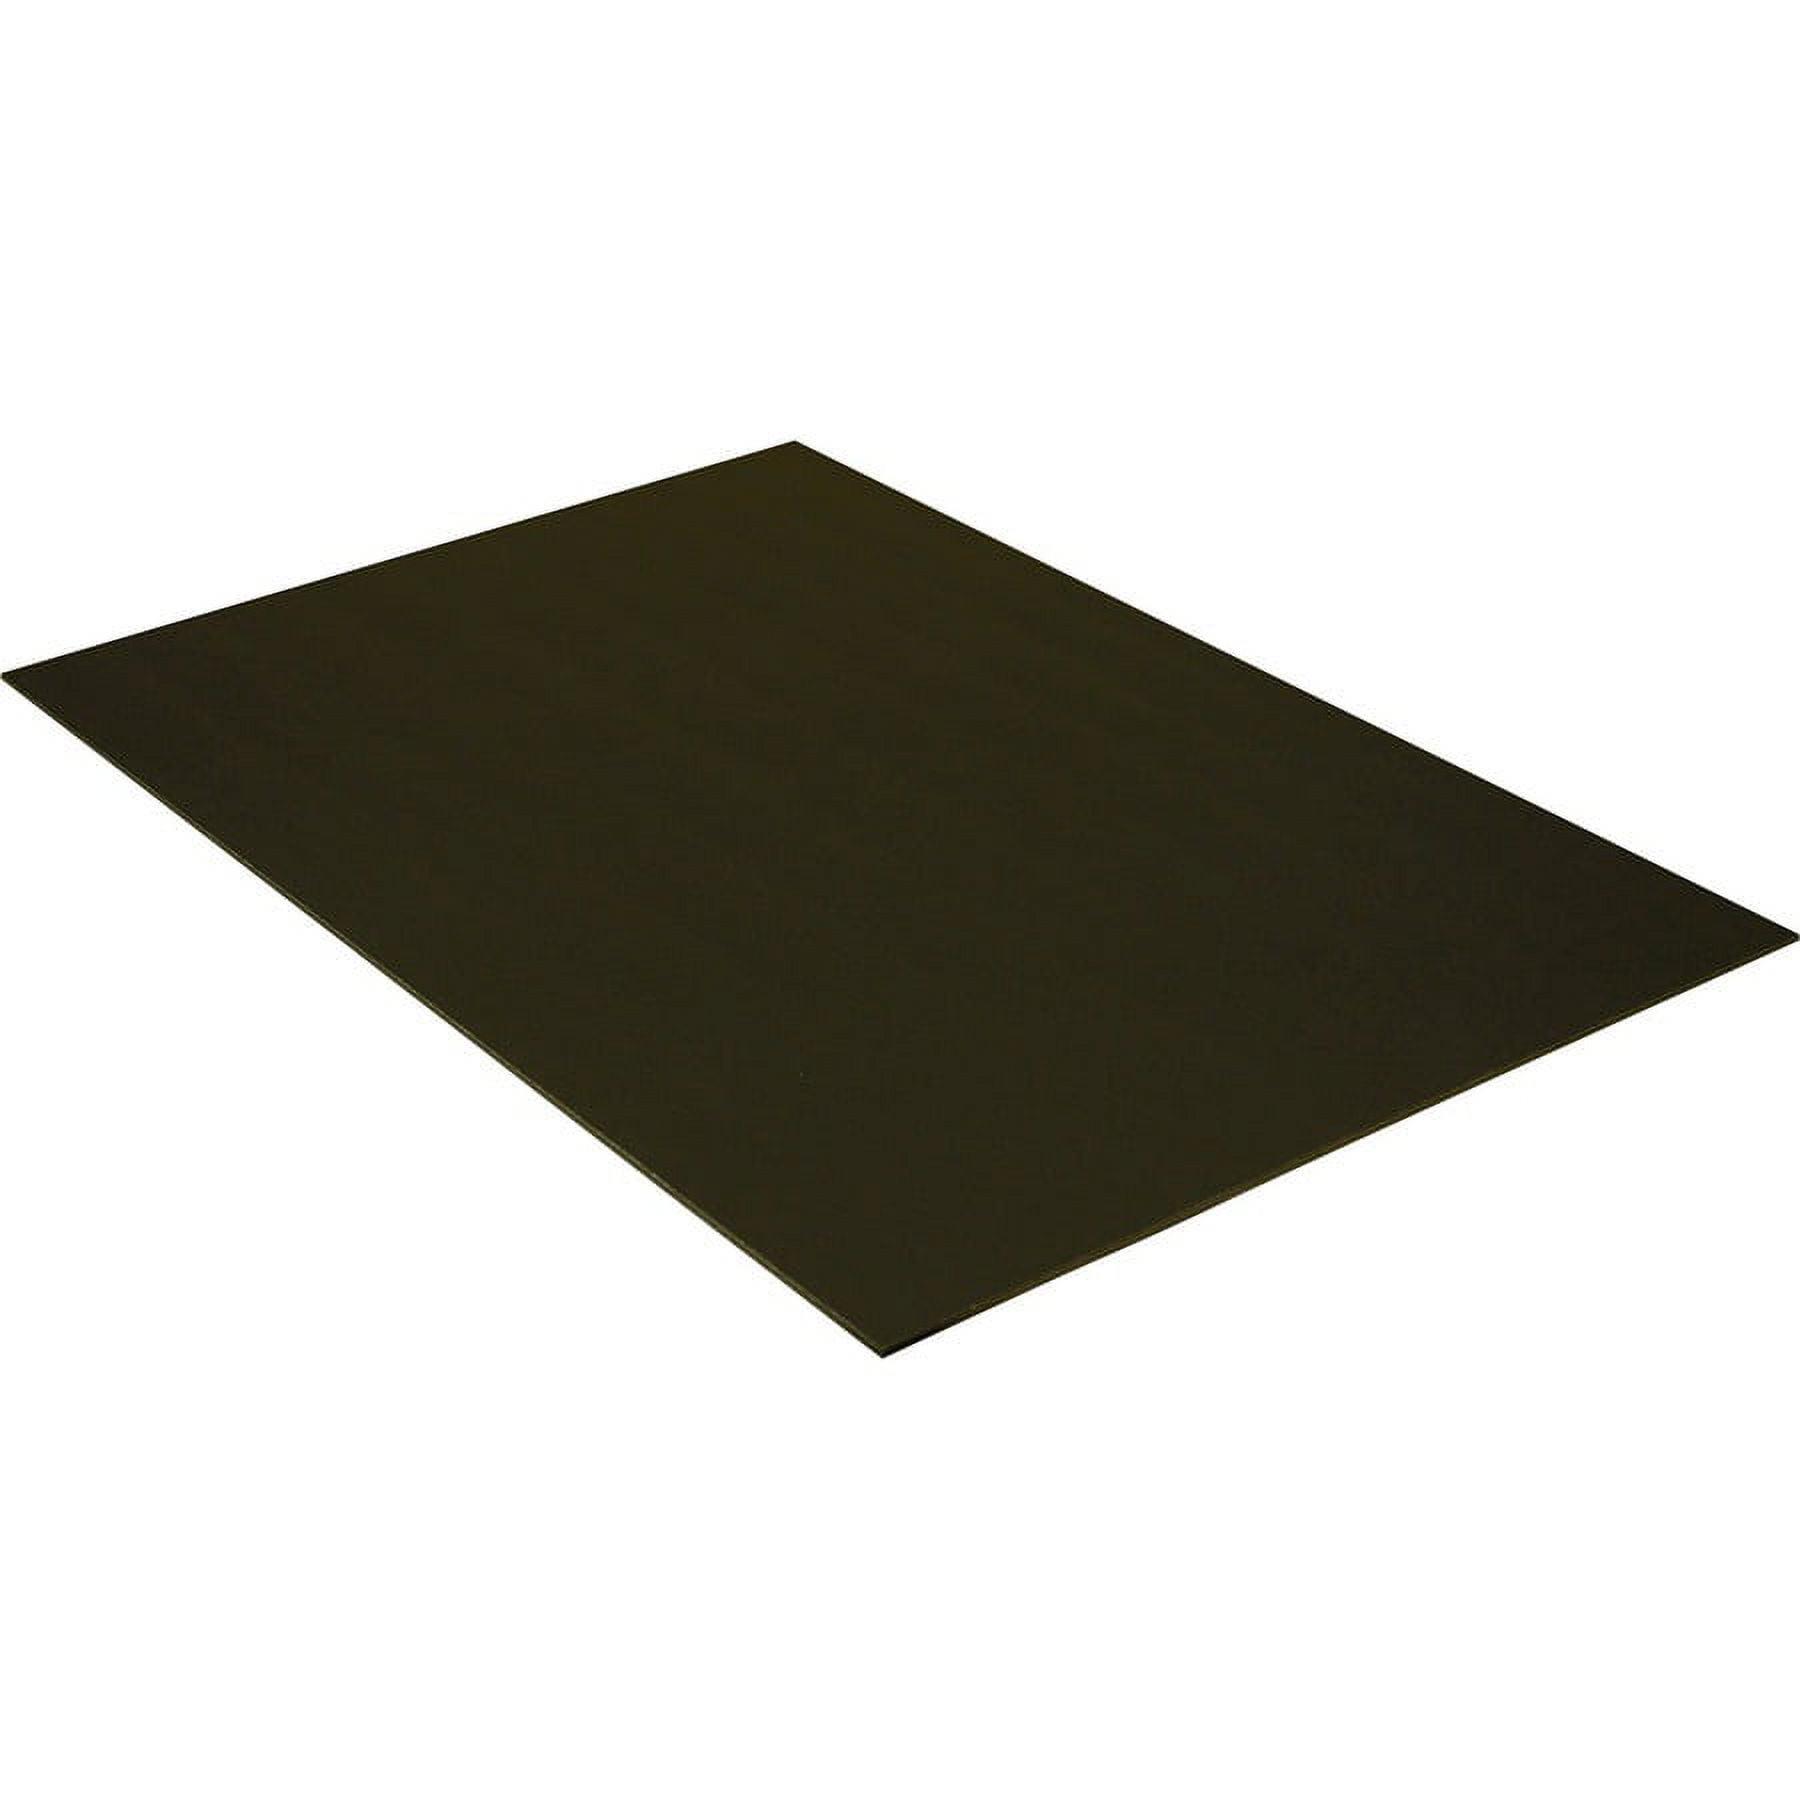 Foam Core Backing Board 3/16 Black 1 Side Self Adhesive 16x20- 5 Pack.  Many Sizes Available. Acid Free Buffered Craft Poster Board for Signs,  Presentations, School, Office and Art Projects 